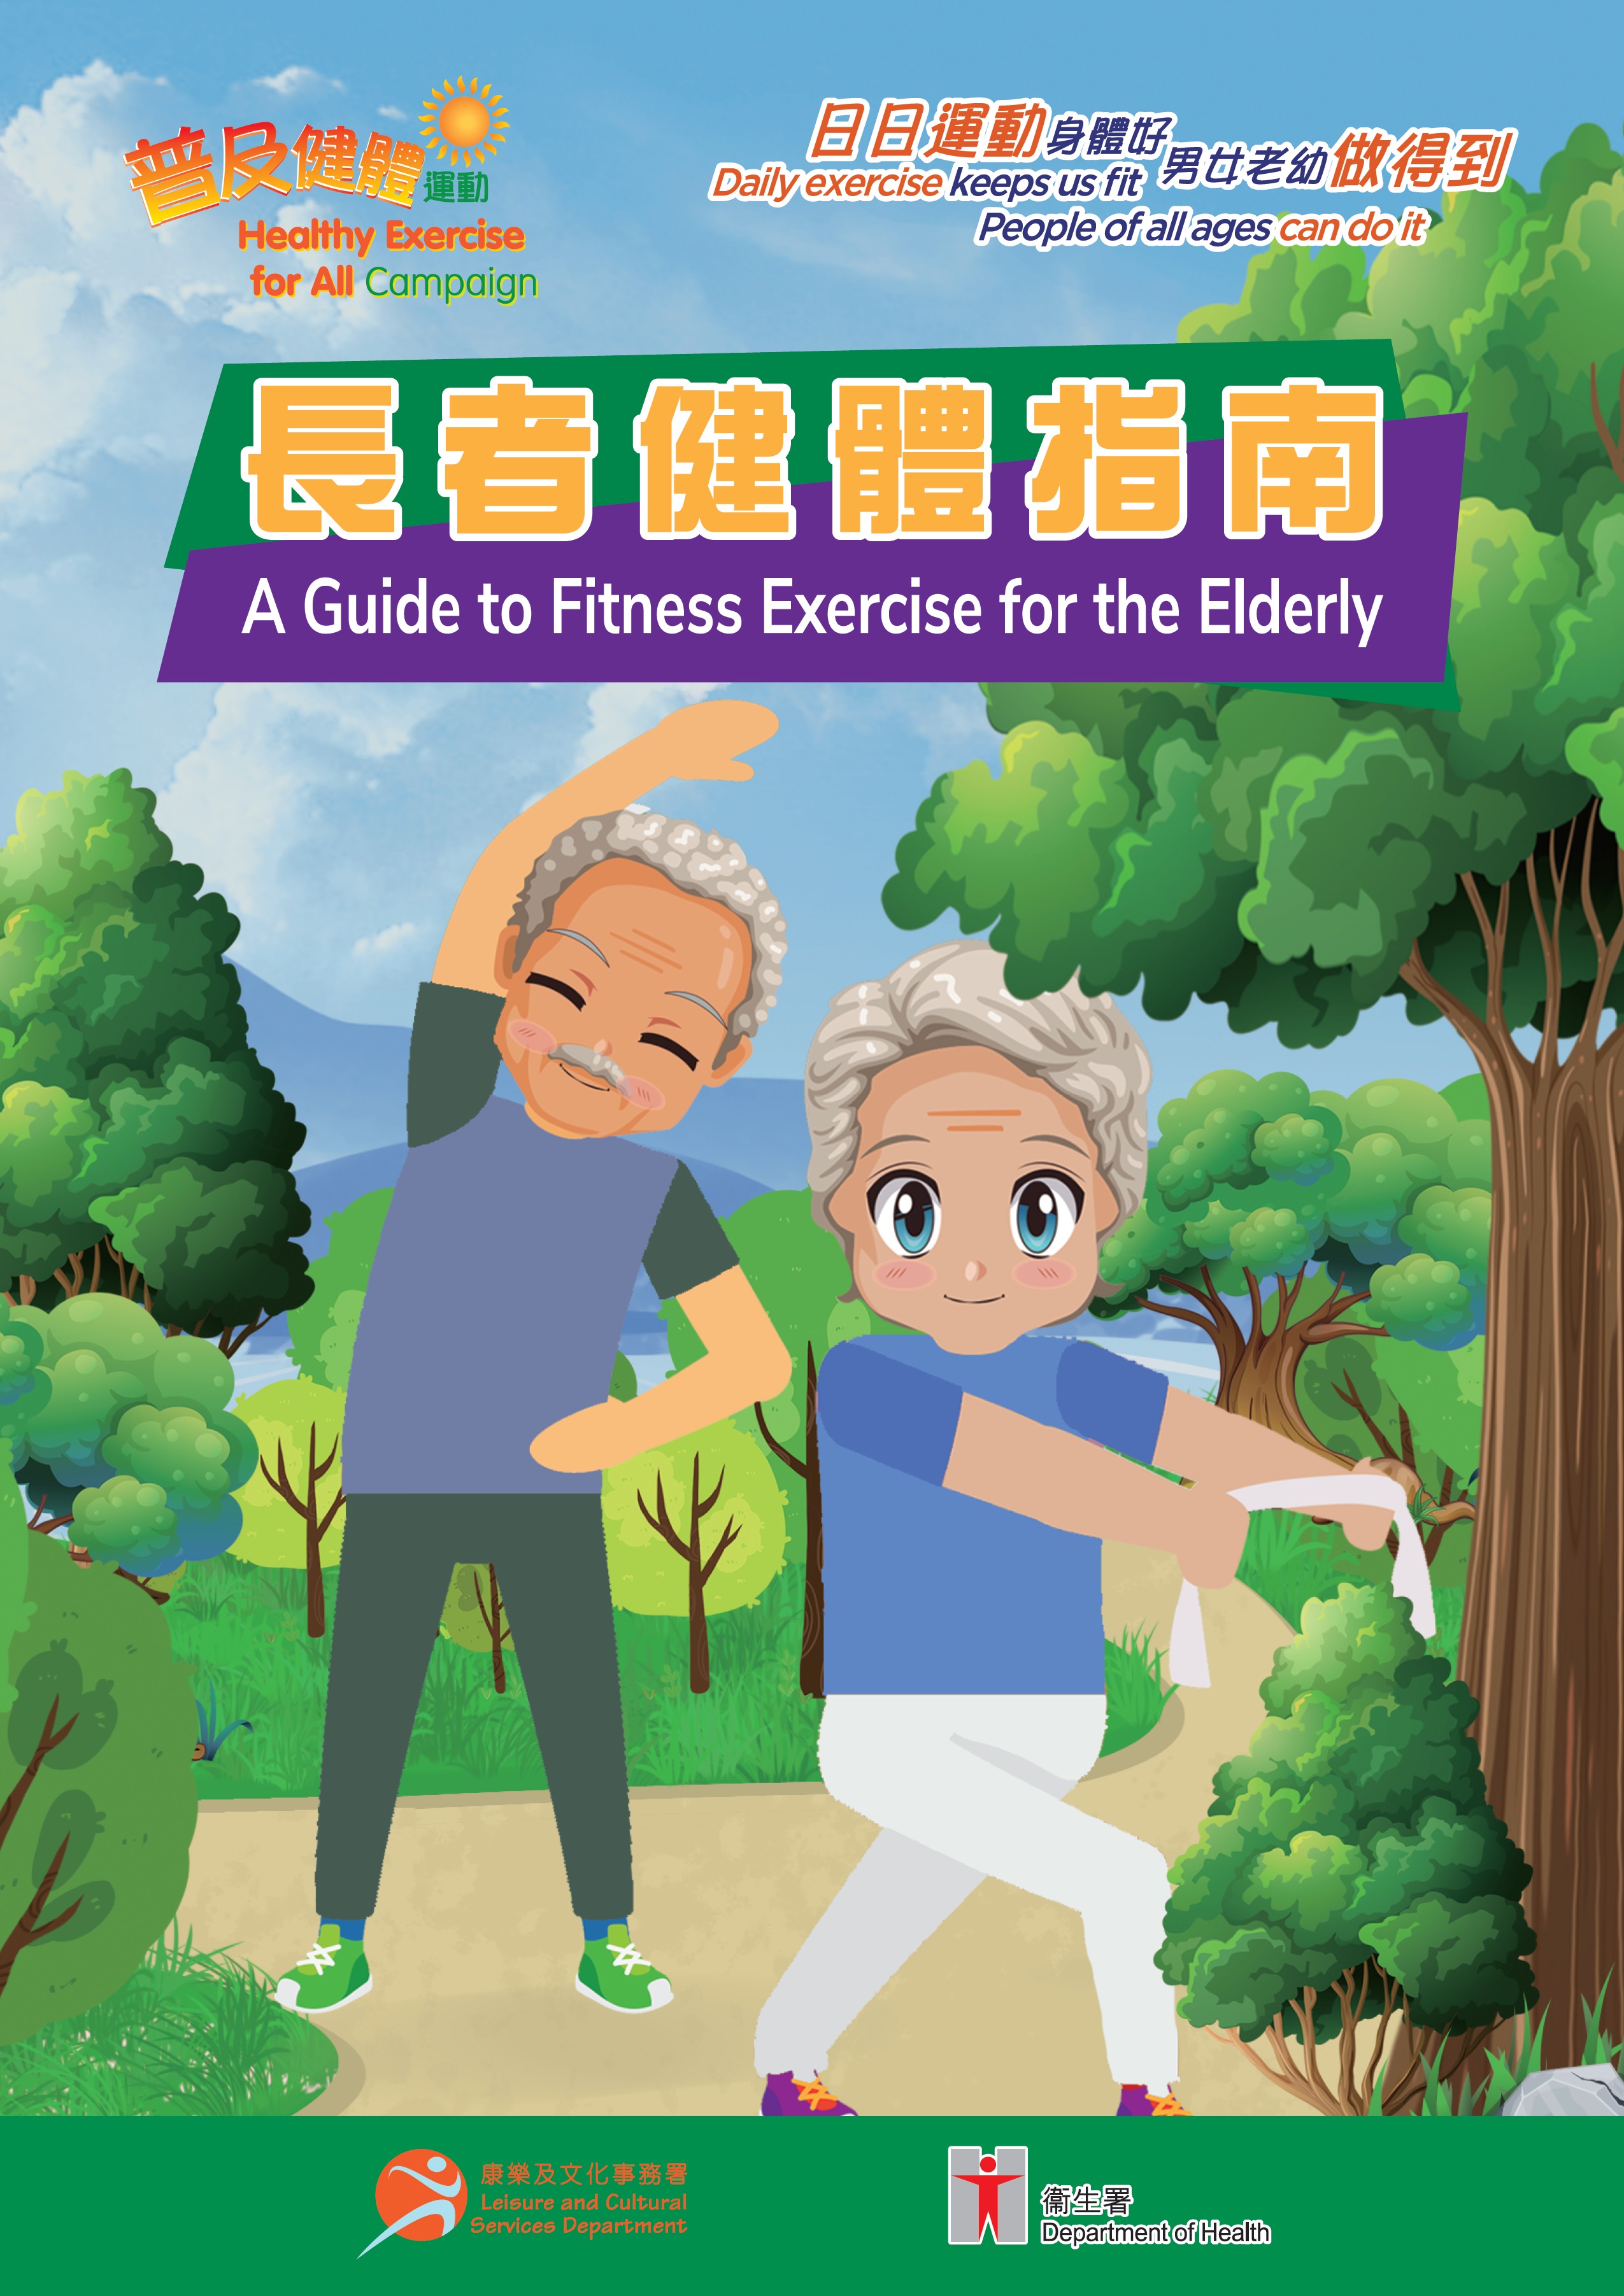 A Guide to Fitness Exercise for the Elderly